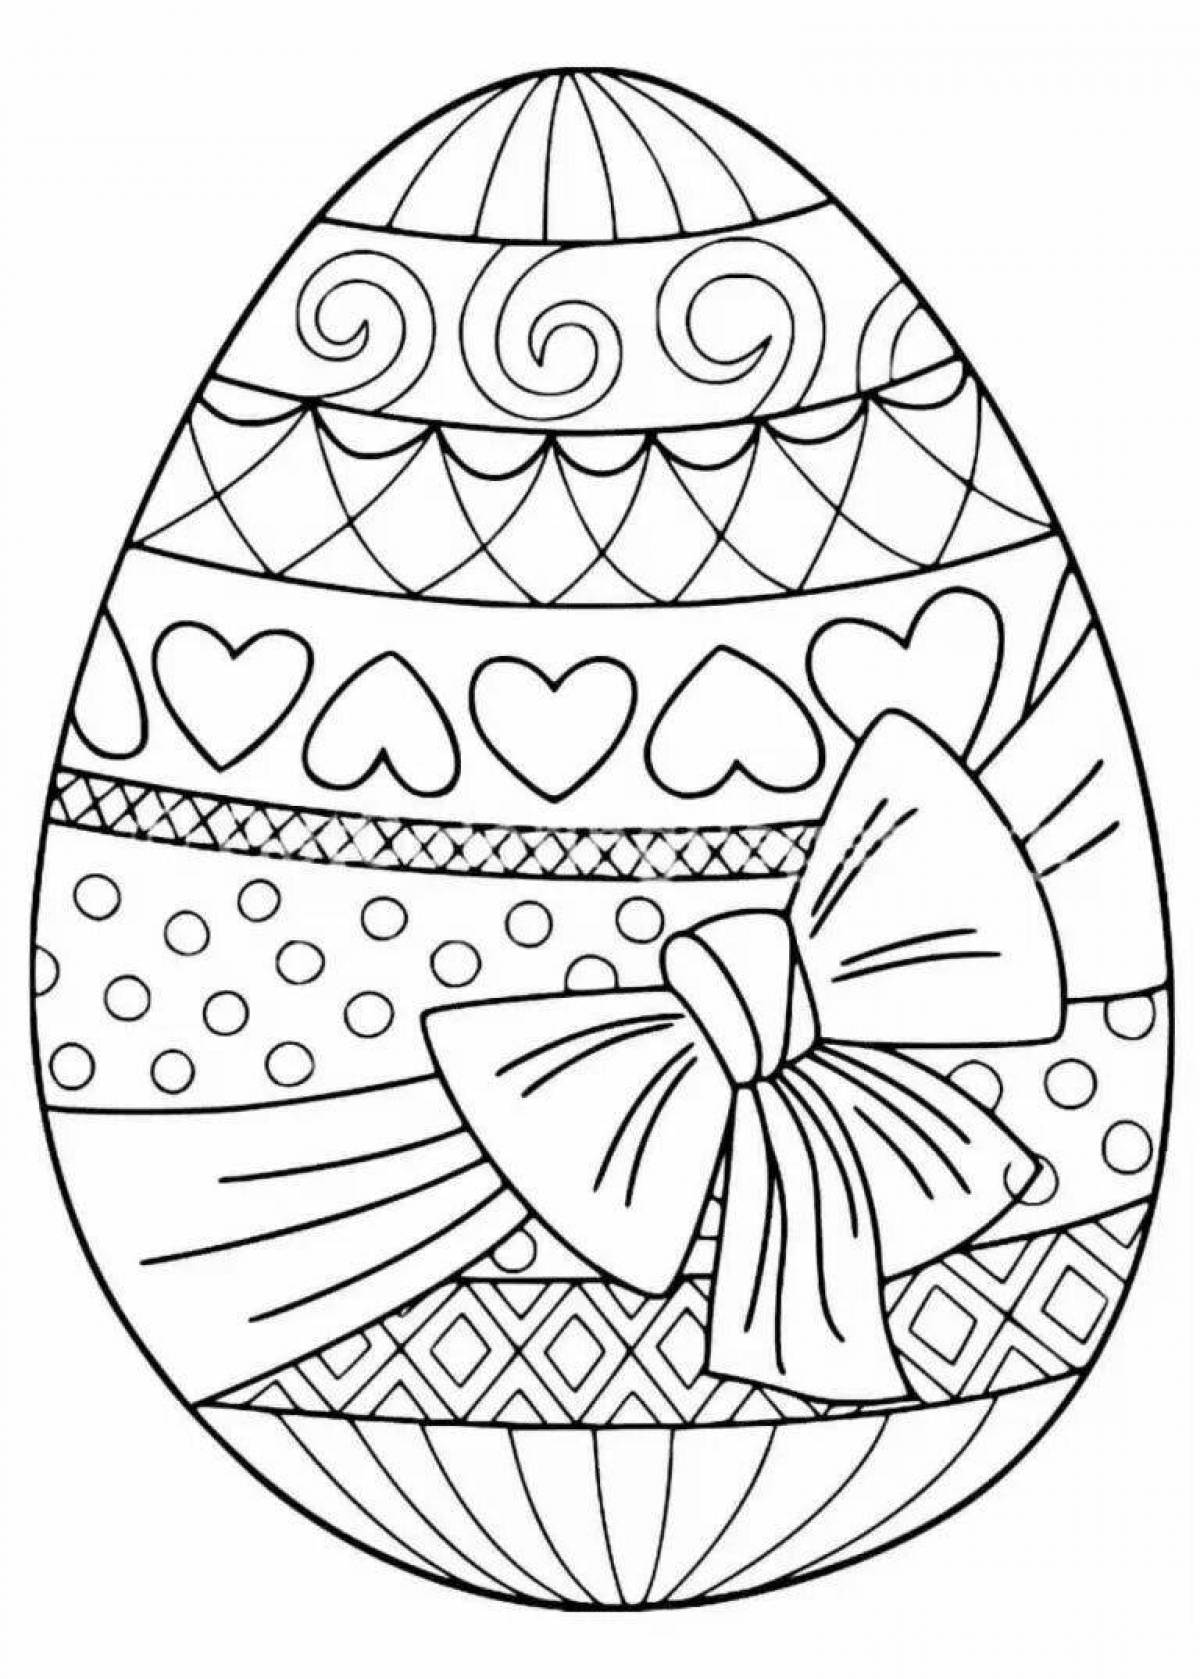 Coloring exquisite golden egg